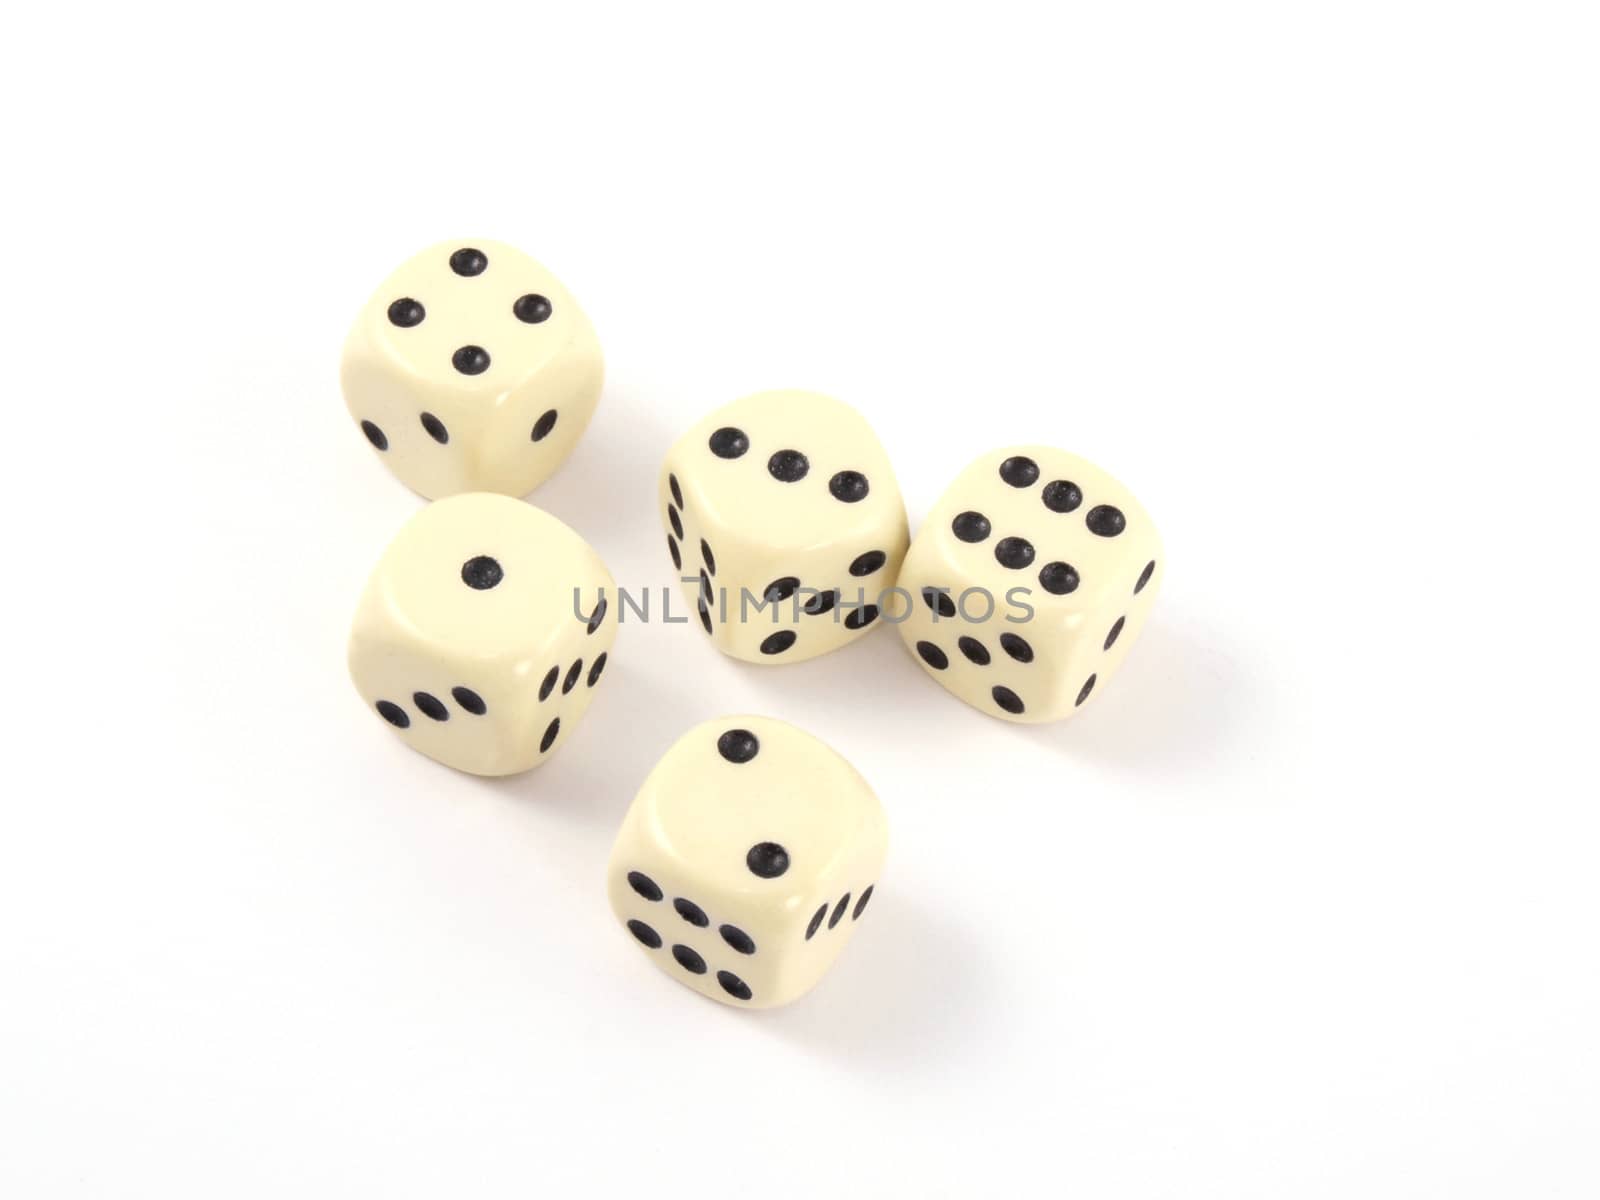 Close up photo of five dice by ianlangley